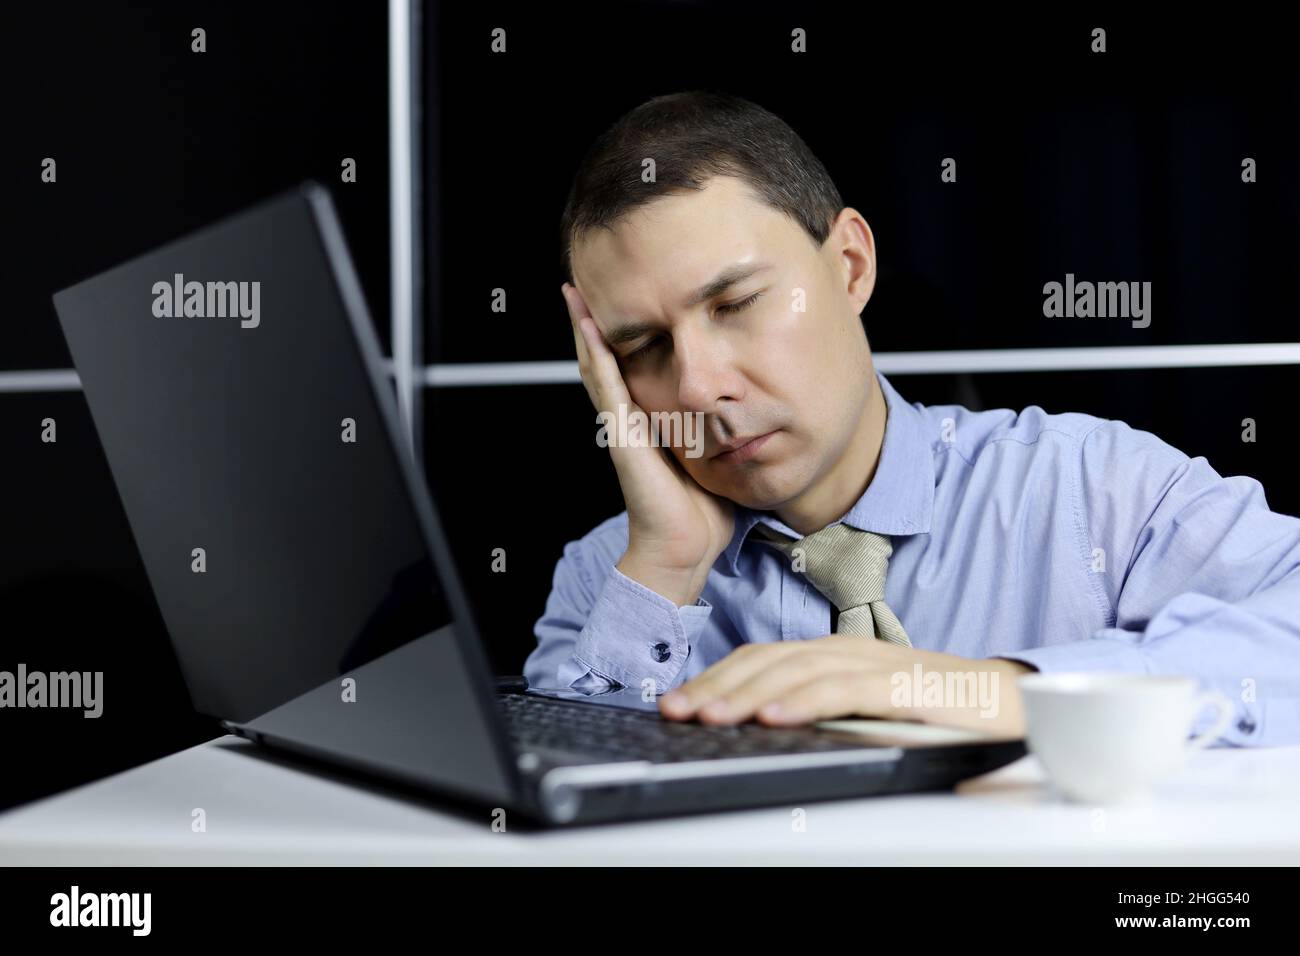 Man in the sleeping at laptop. Office worker after sleepless night, tired of overworking concept, chronic fatigue at workplace Stock Photo